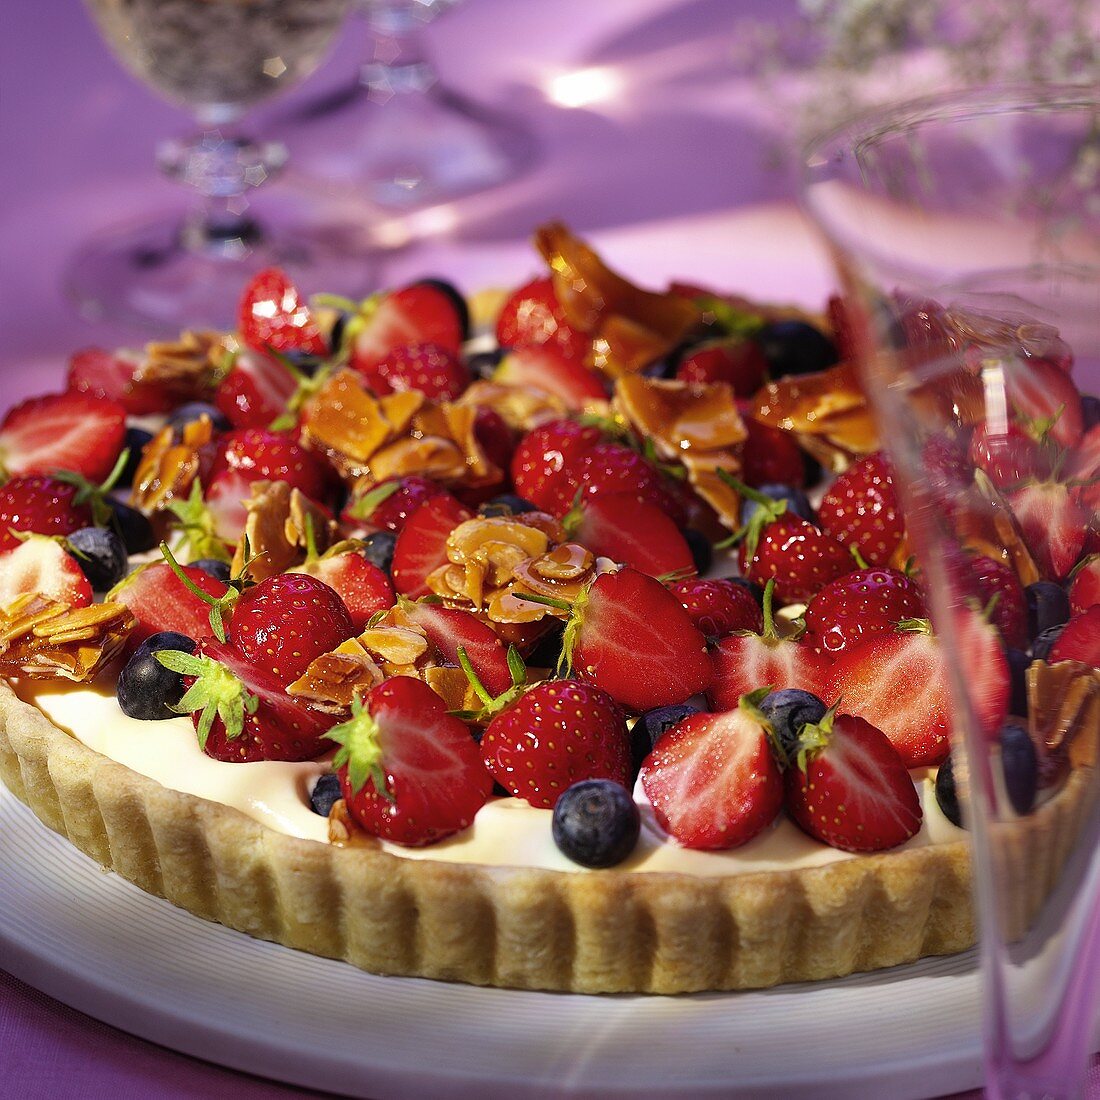 Strawberry and blueberry flan with vanilla cream & almonds